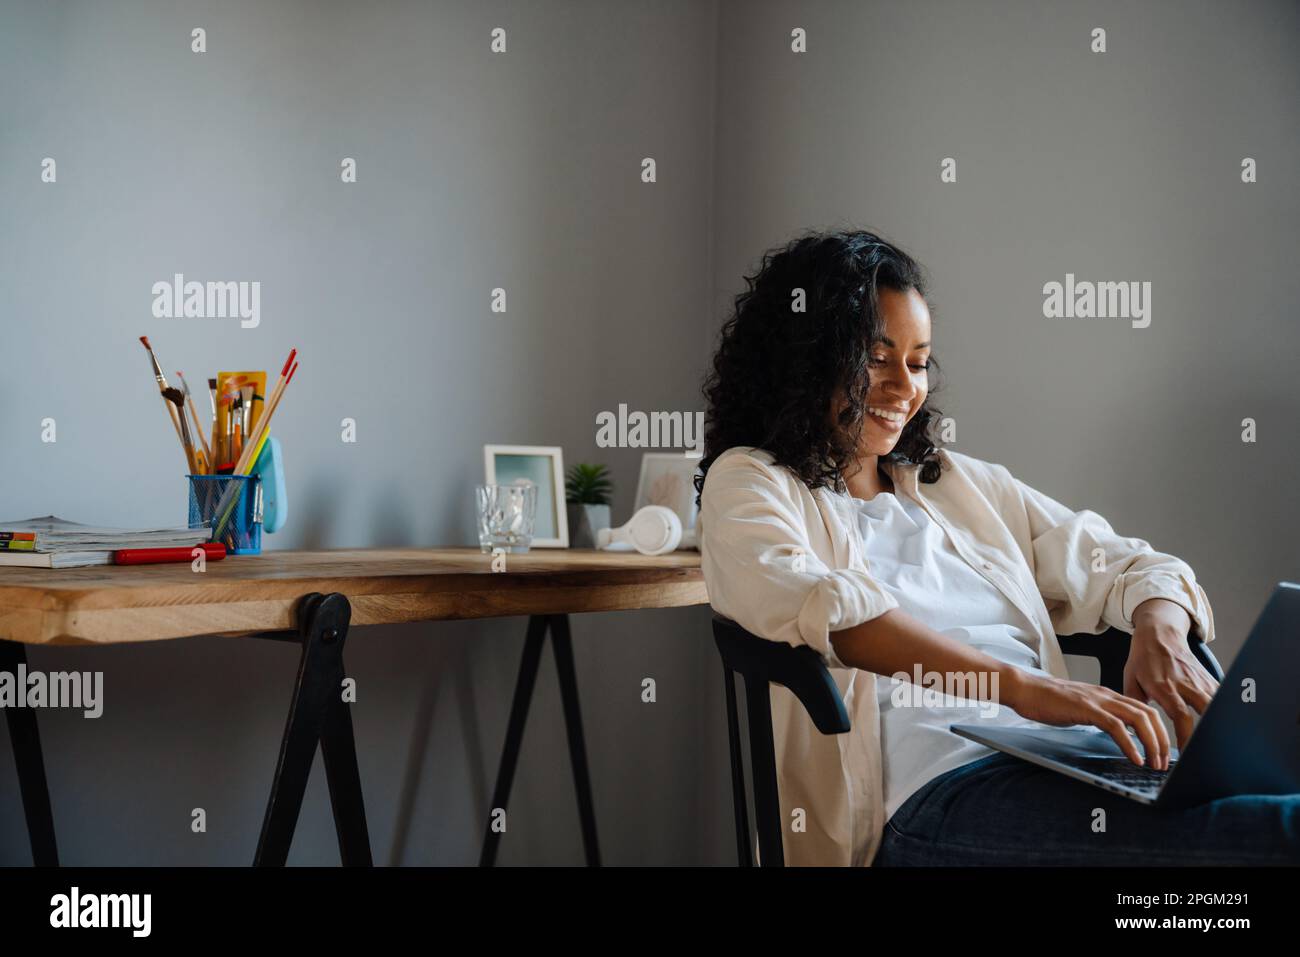 Black young woman smiling and working with laptop while sitting on chair at home Stock Photo